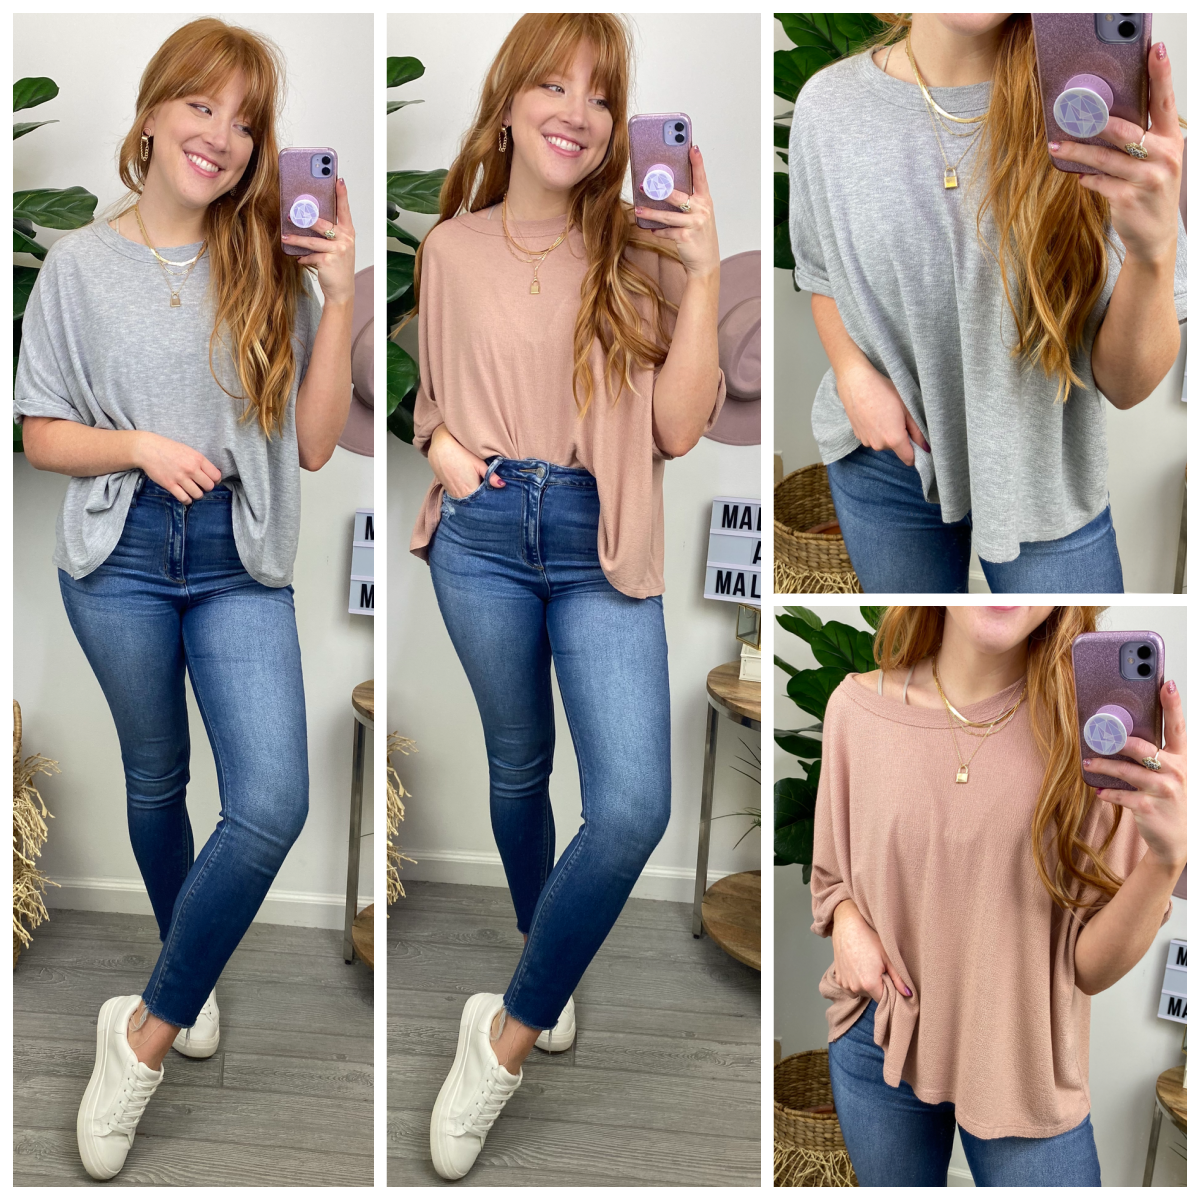  Sonna Cuffed Sleeve Relaxed Top - Madison and Mallory